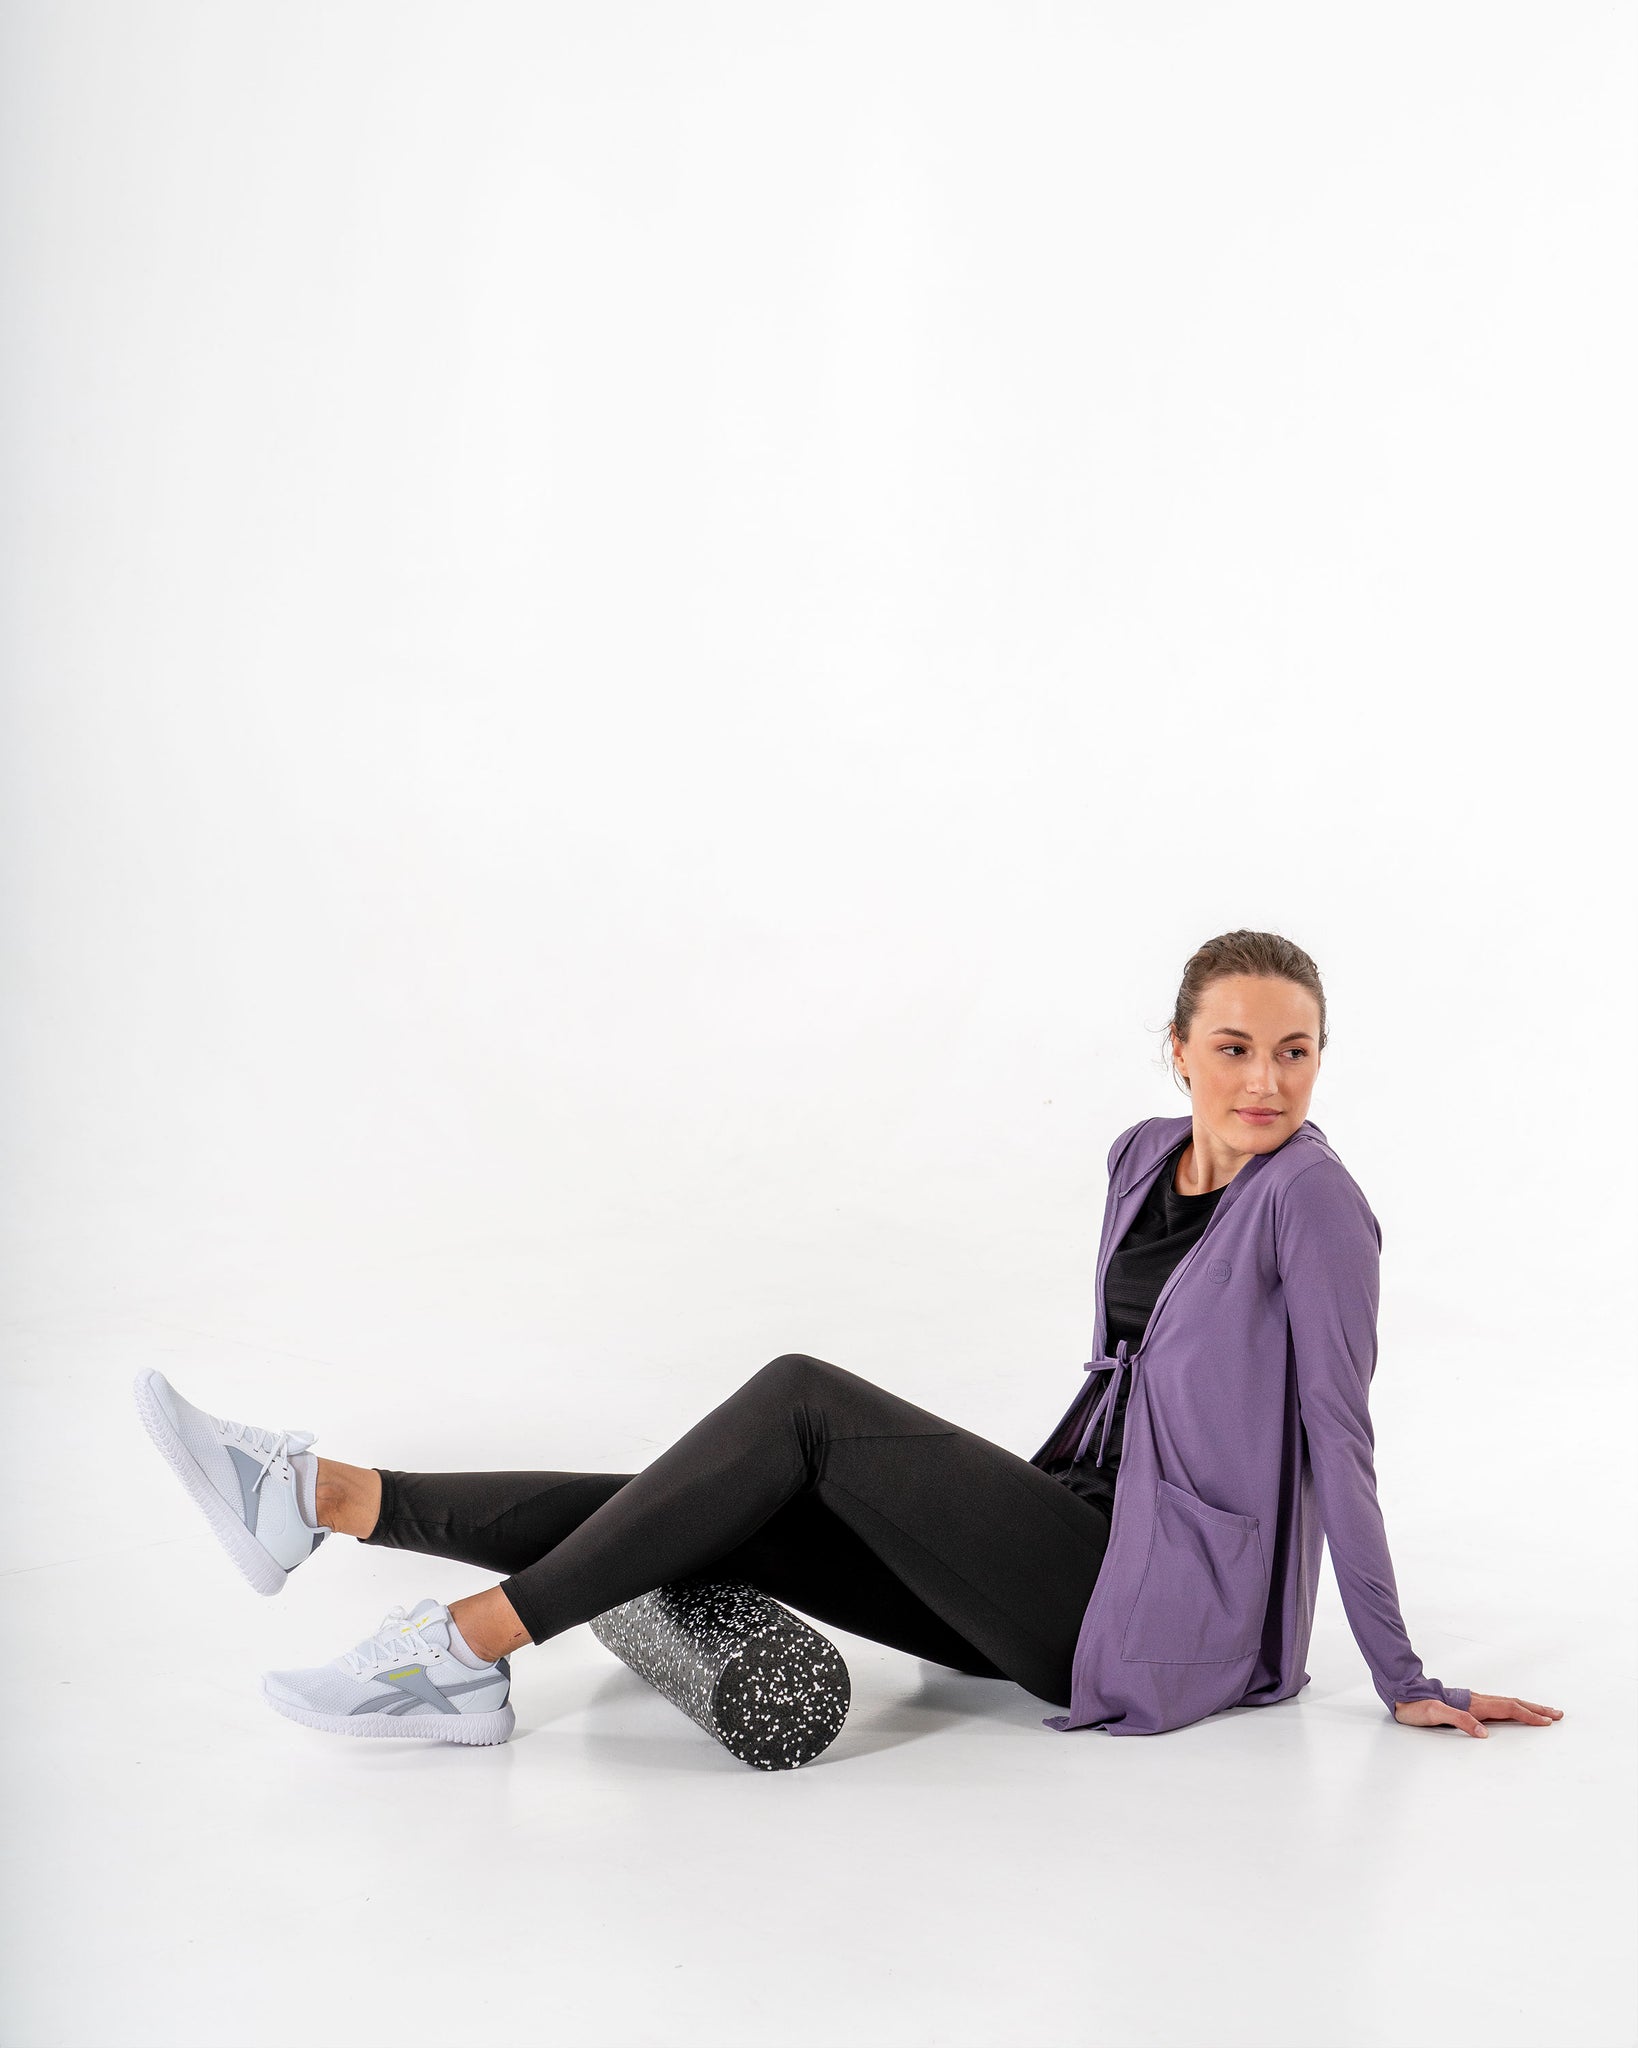 Move It Cardigan in lavender by Veil Garments. Modest activewear collection.